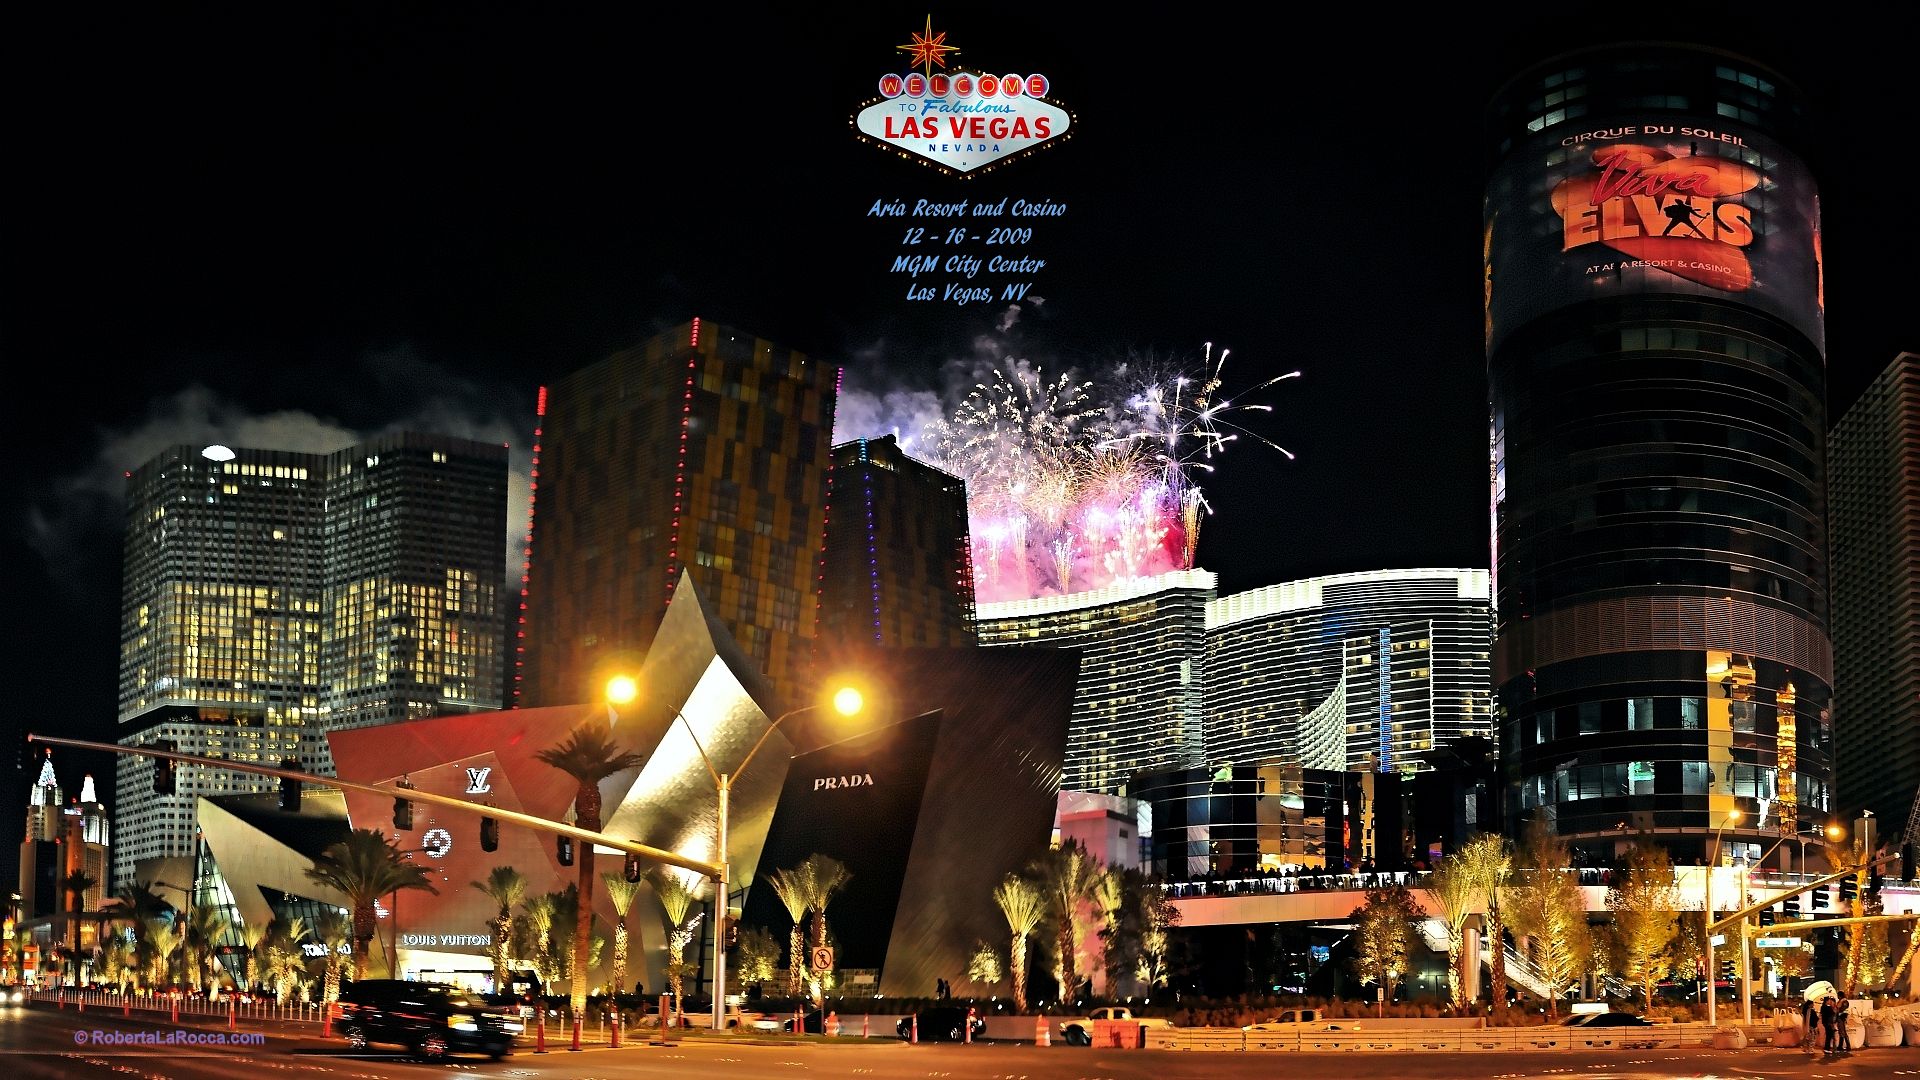 Las Vegas Opening Of Aria Hotel And Casino Fireworks - Aria Las Vegas , HD Wallpaper & Backgrounds